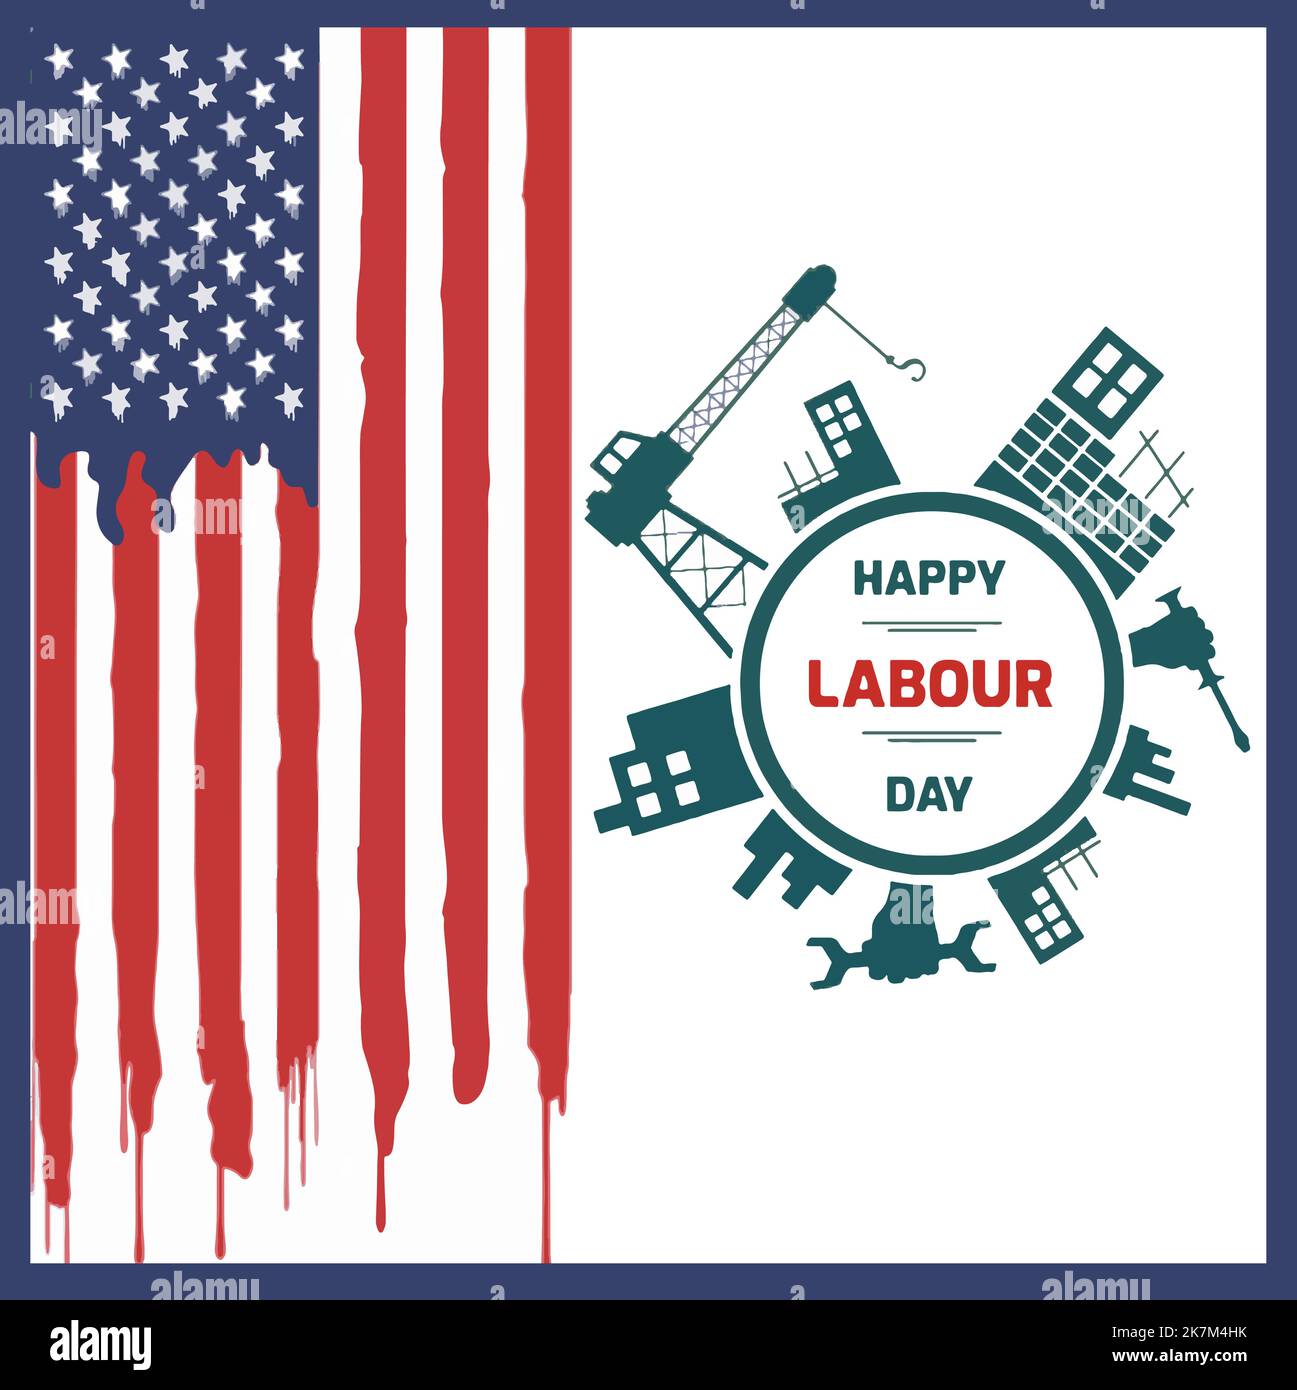 U S labor day vector art illustration with america flag Stock Vector